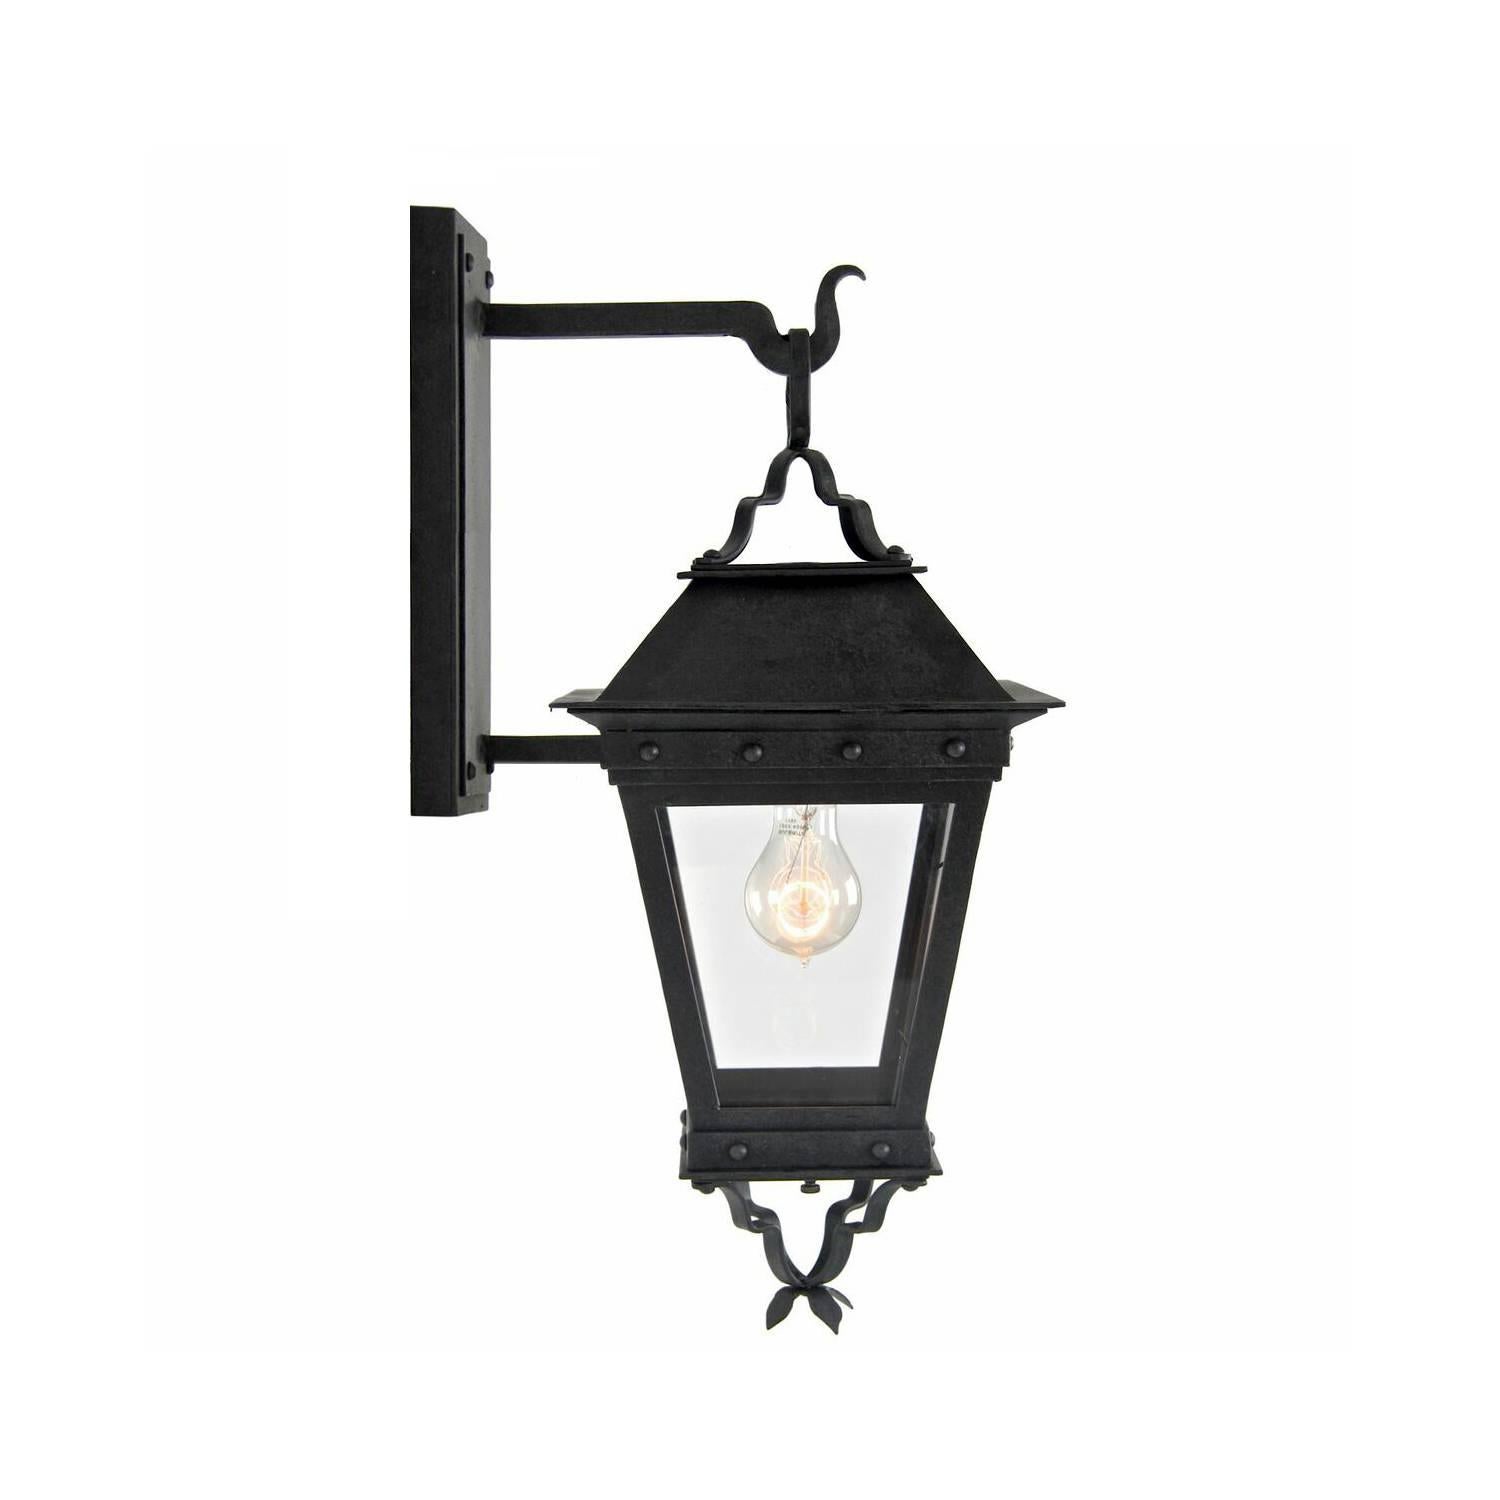 El Presidio Real de Santa Barbara is one of California's oldest structures, built by the Spanish in 1782 as a military outpost, and serves as inspiration for this lantern. This lantern features a familiar silhouette with a tapered cage, subtle